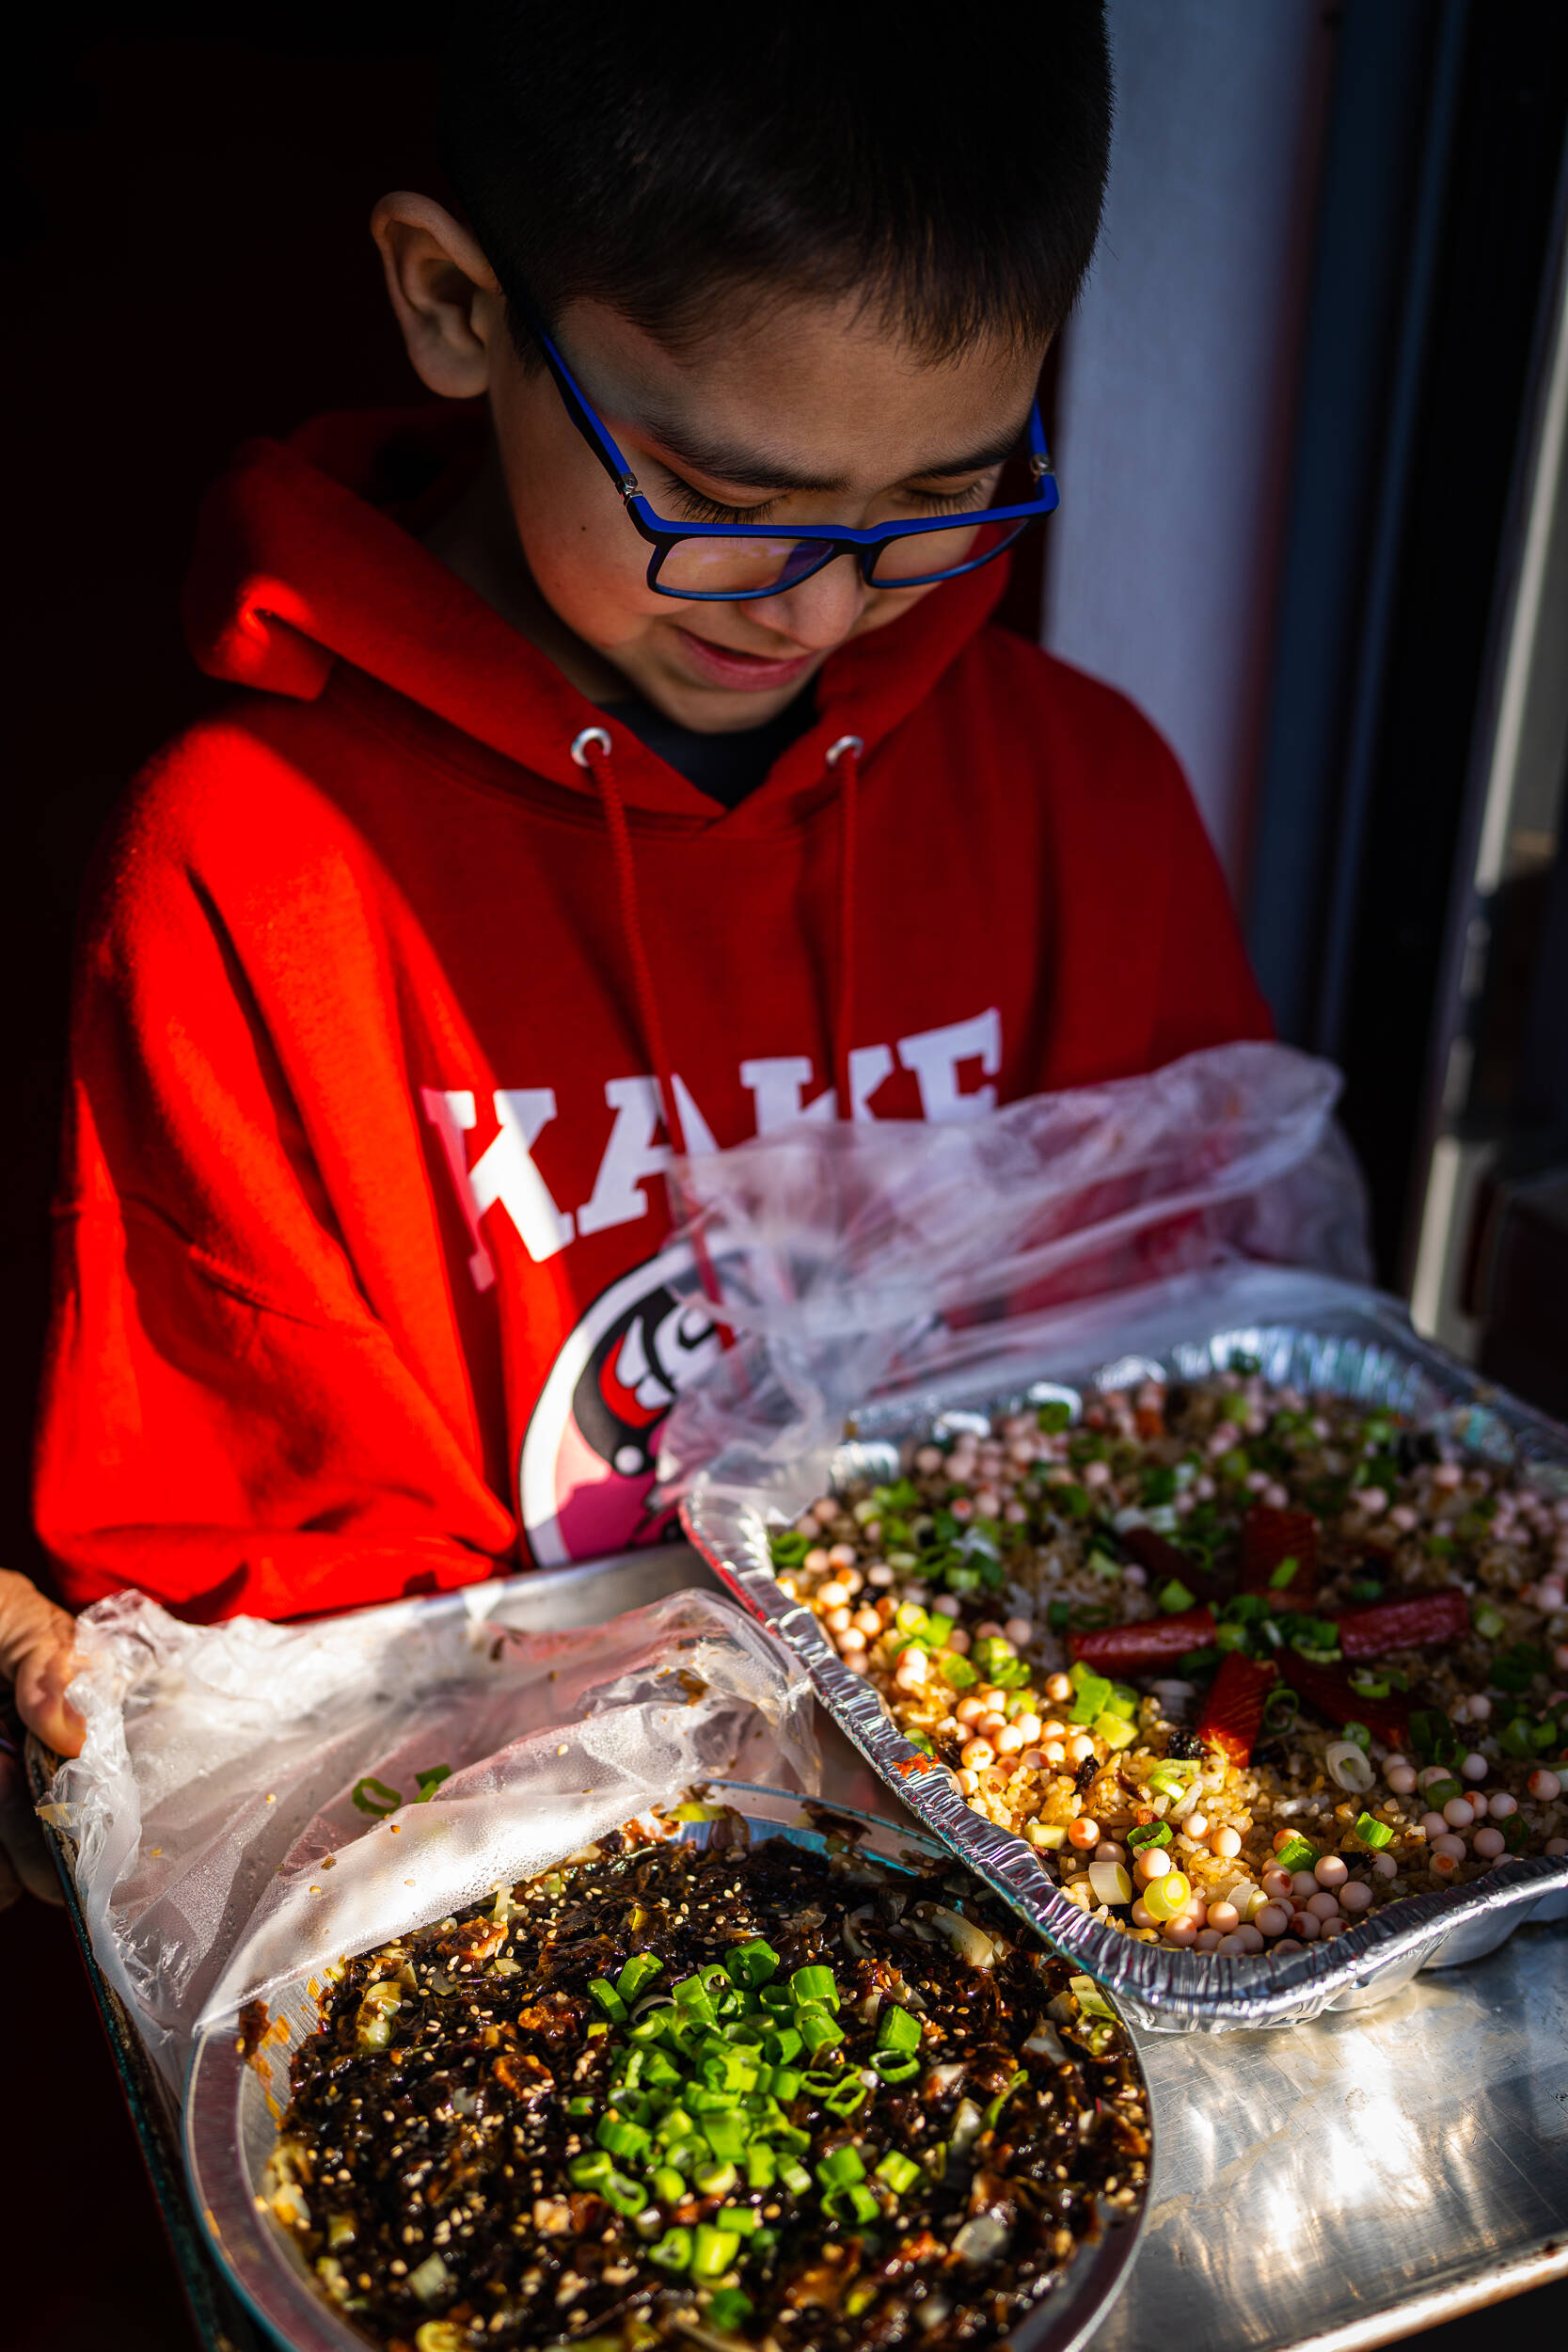 Community members of all ages brought an array of homemade foods with wild ingredients like black seaweed, smoked salmon, salmon eggs and cloudberries to enter the food competition. (Courtesy Photo / Bethany Goodrich)